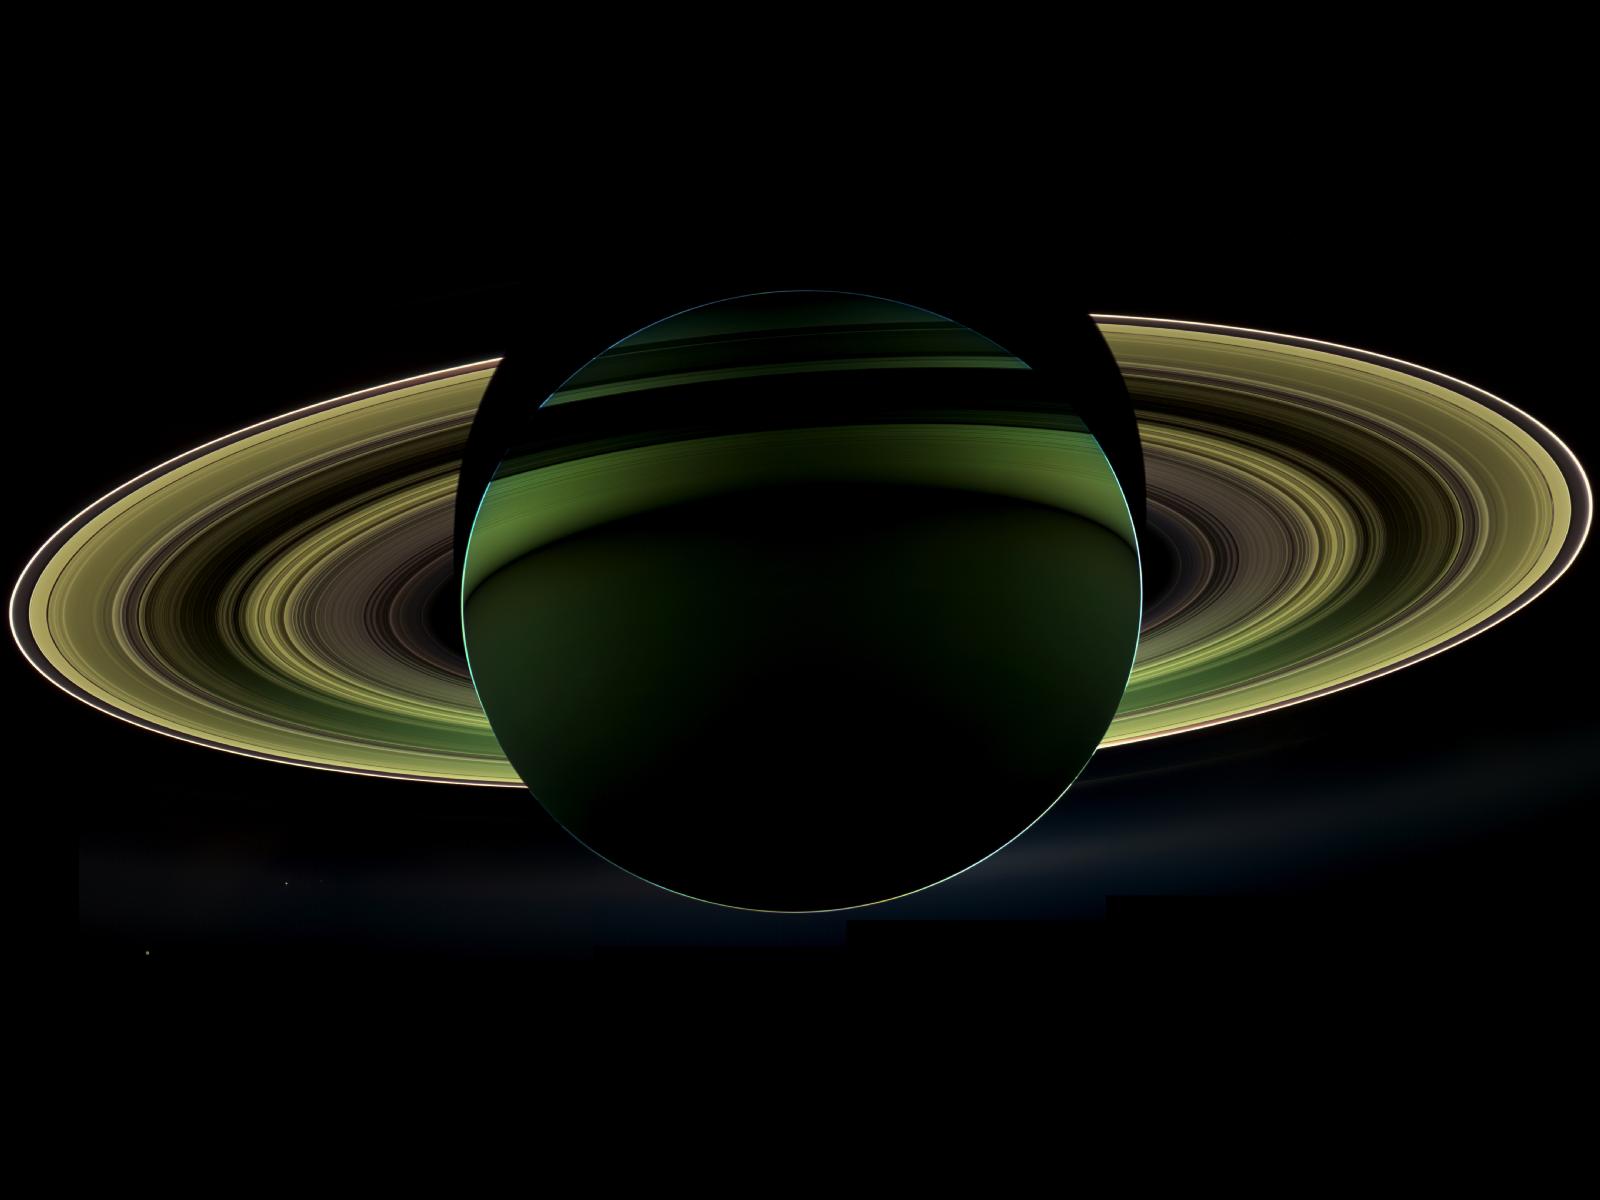 NASA's Cassini spacecraft has delivered a glorious view of Saturn, taken while the spacecraft was in Saturn's shadow. Image credit: NASA.